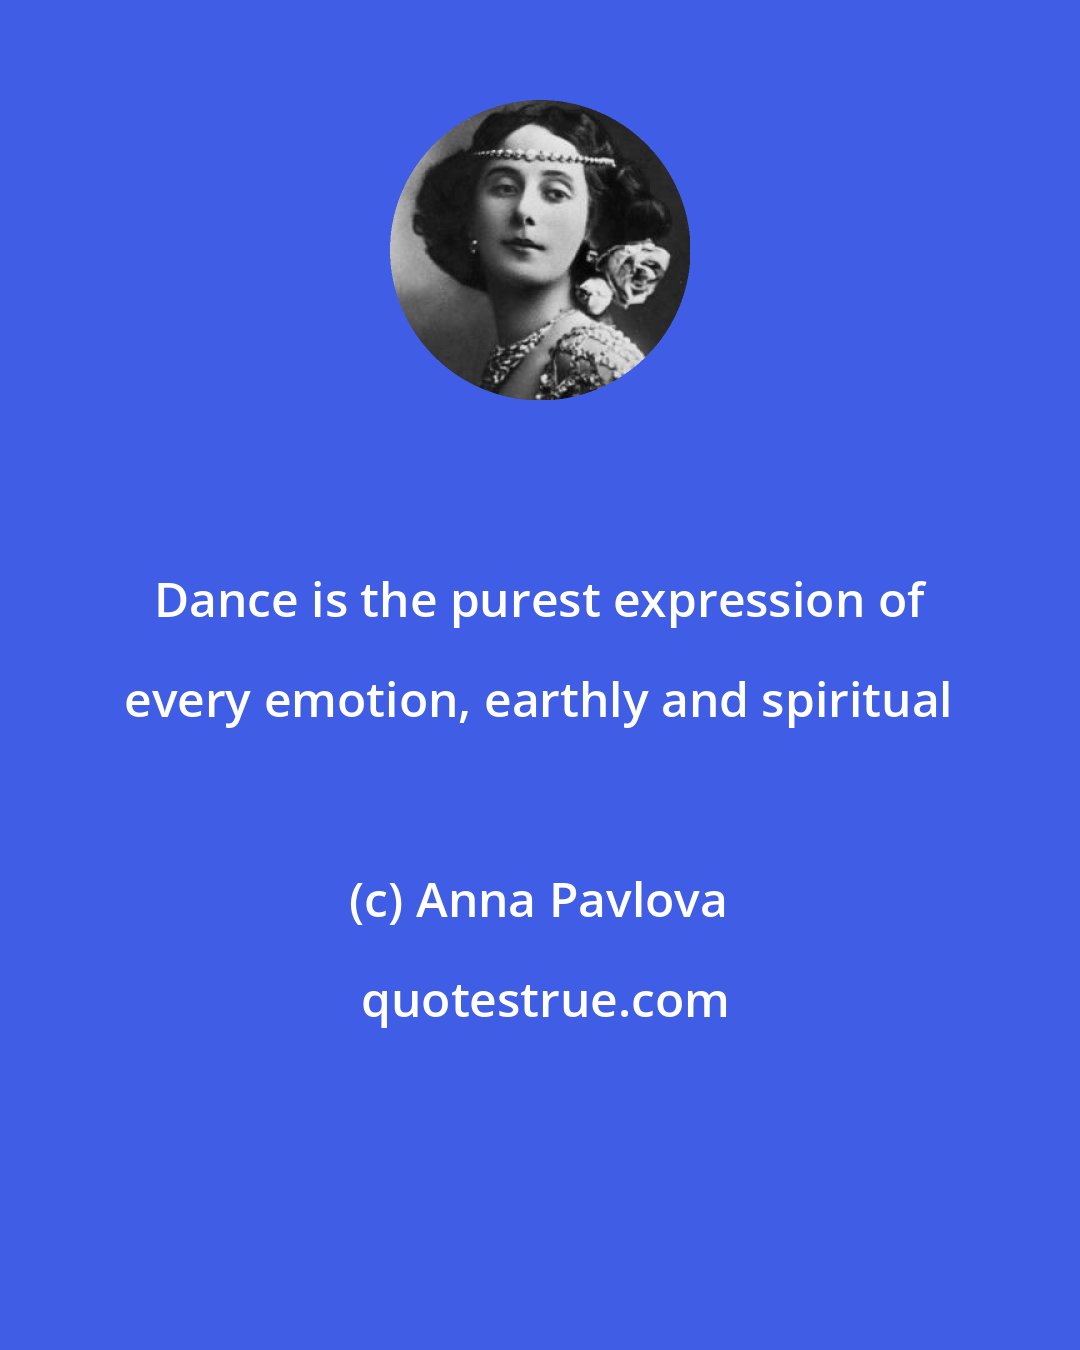 Anna Pavlova: Dance is the purest expression of every emotion, earthly and spiritual